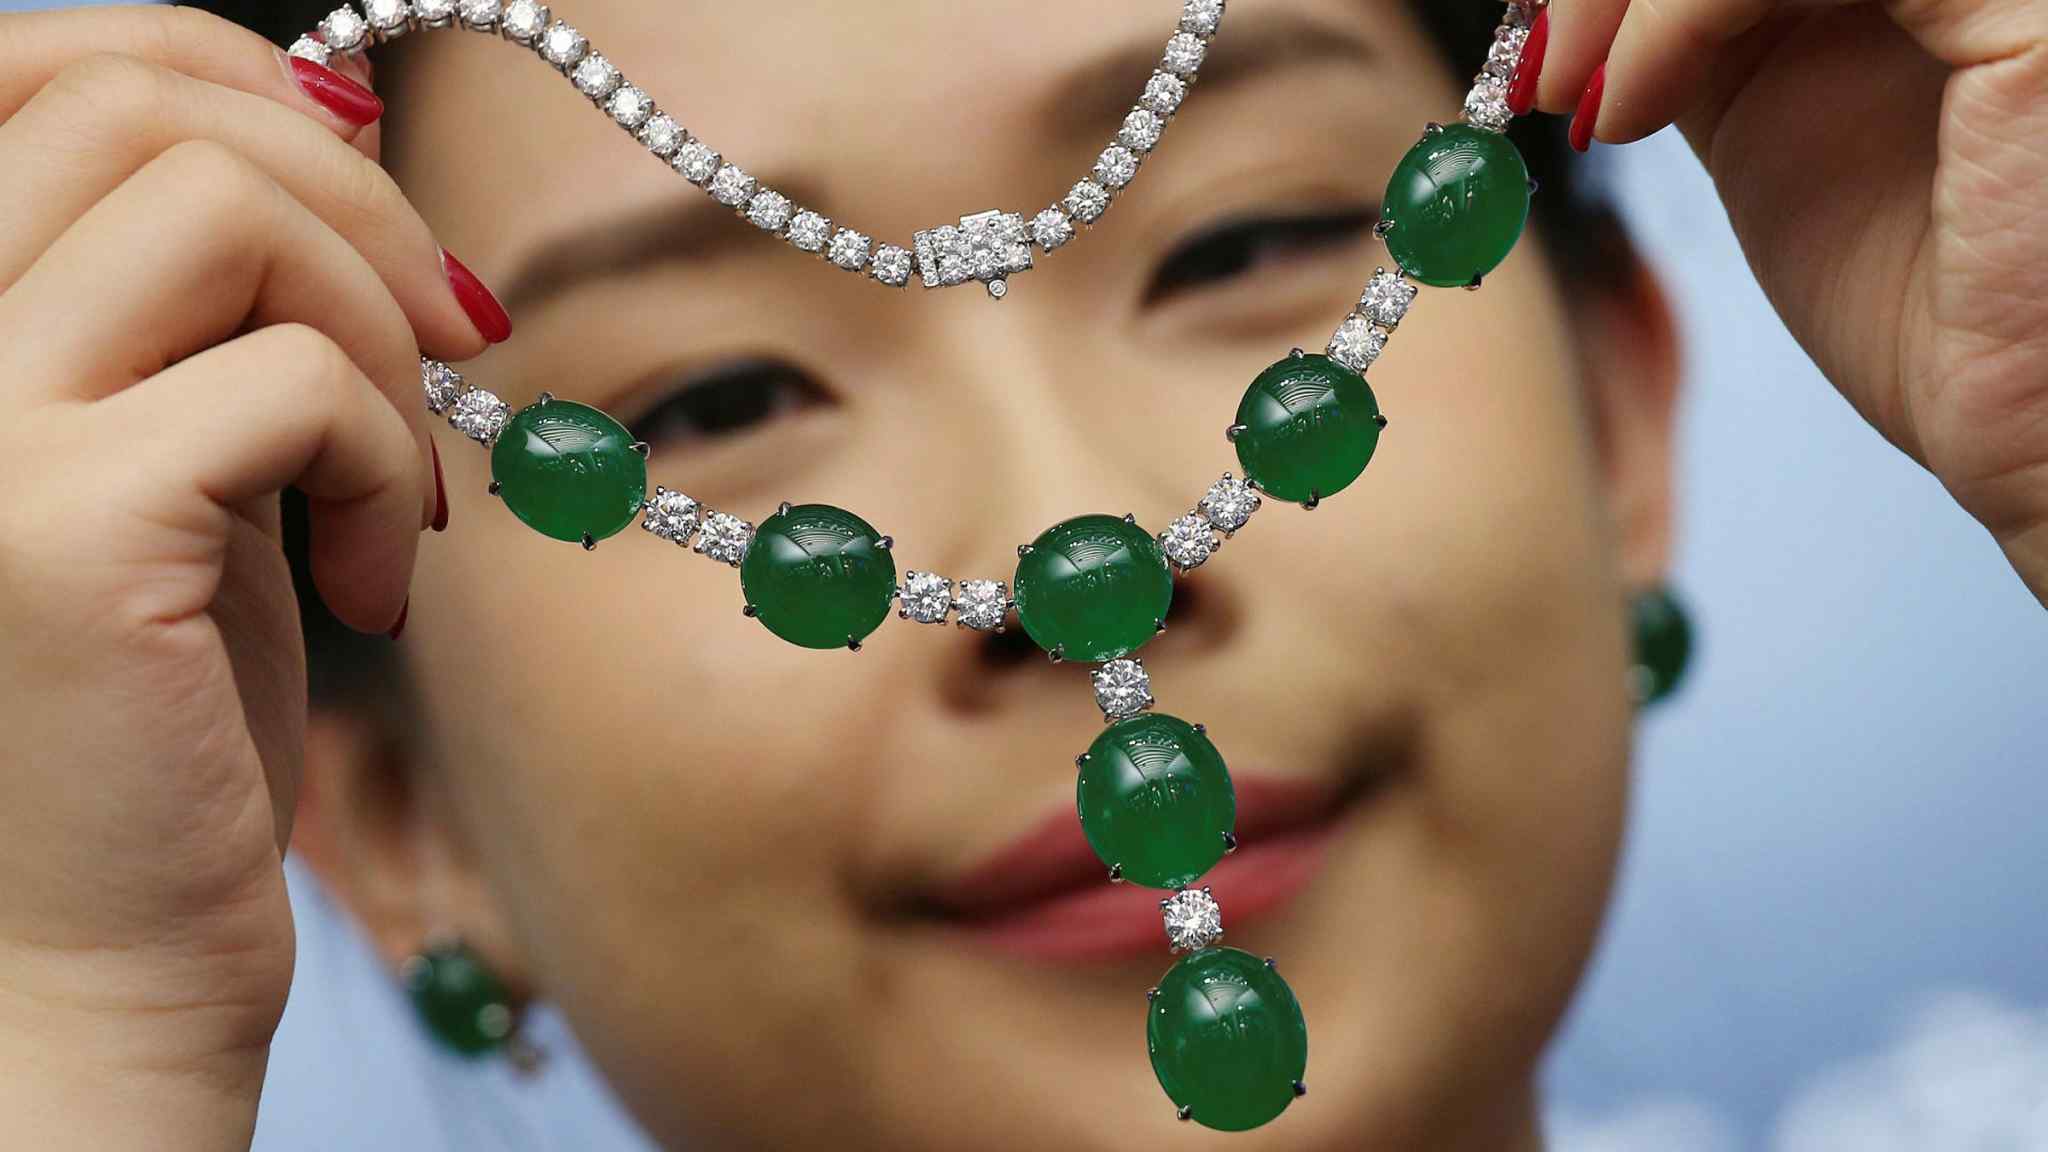 Chinese investors ditch property for jade in search of higher returns